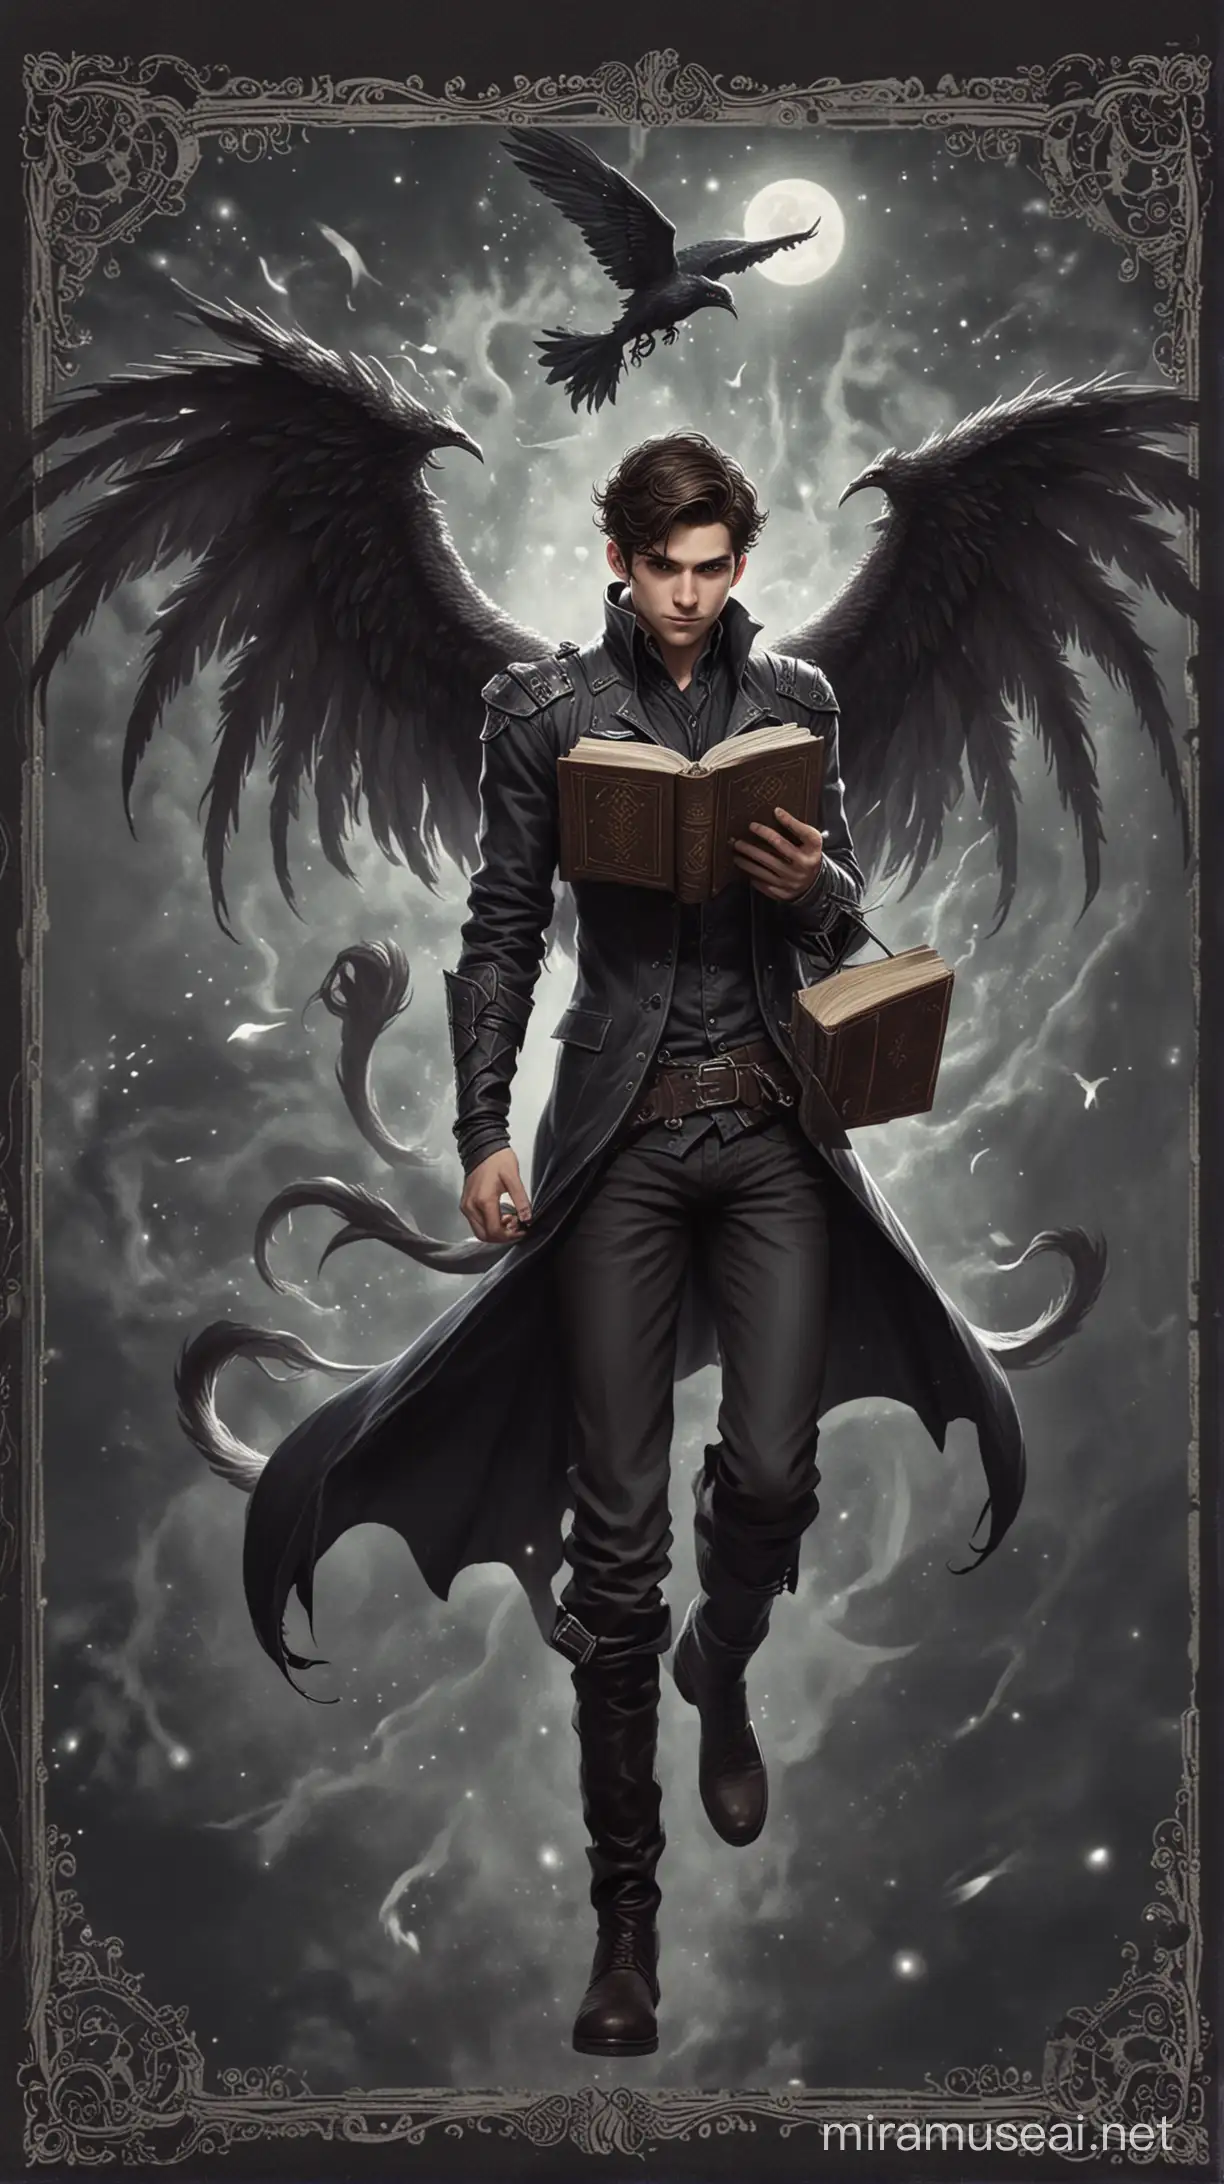 the guy who have wings and tail and he also have an eldritch spellbook  and have his right arm somewhat exposed So I sorta want him floating, book infront of him at an angle, like if you were to hold a book infront of you to read.